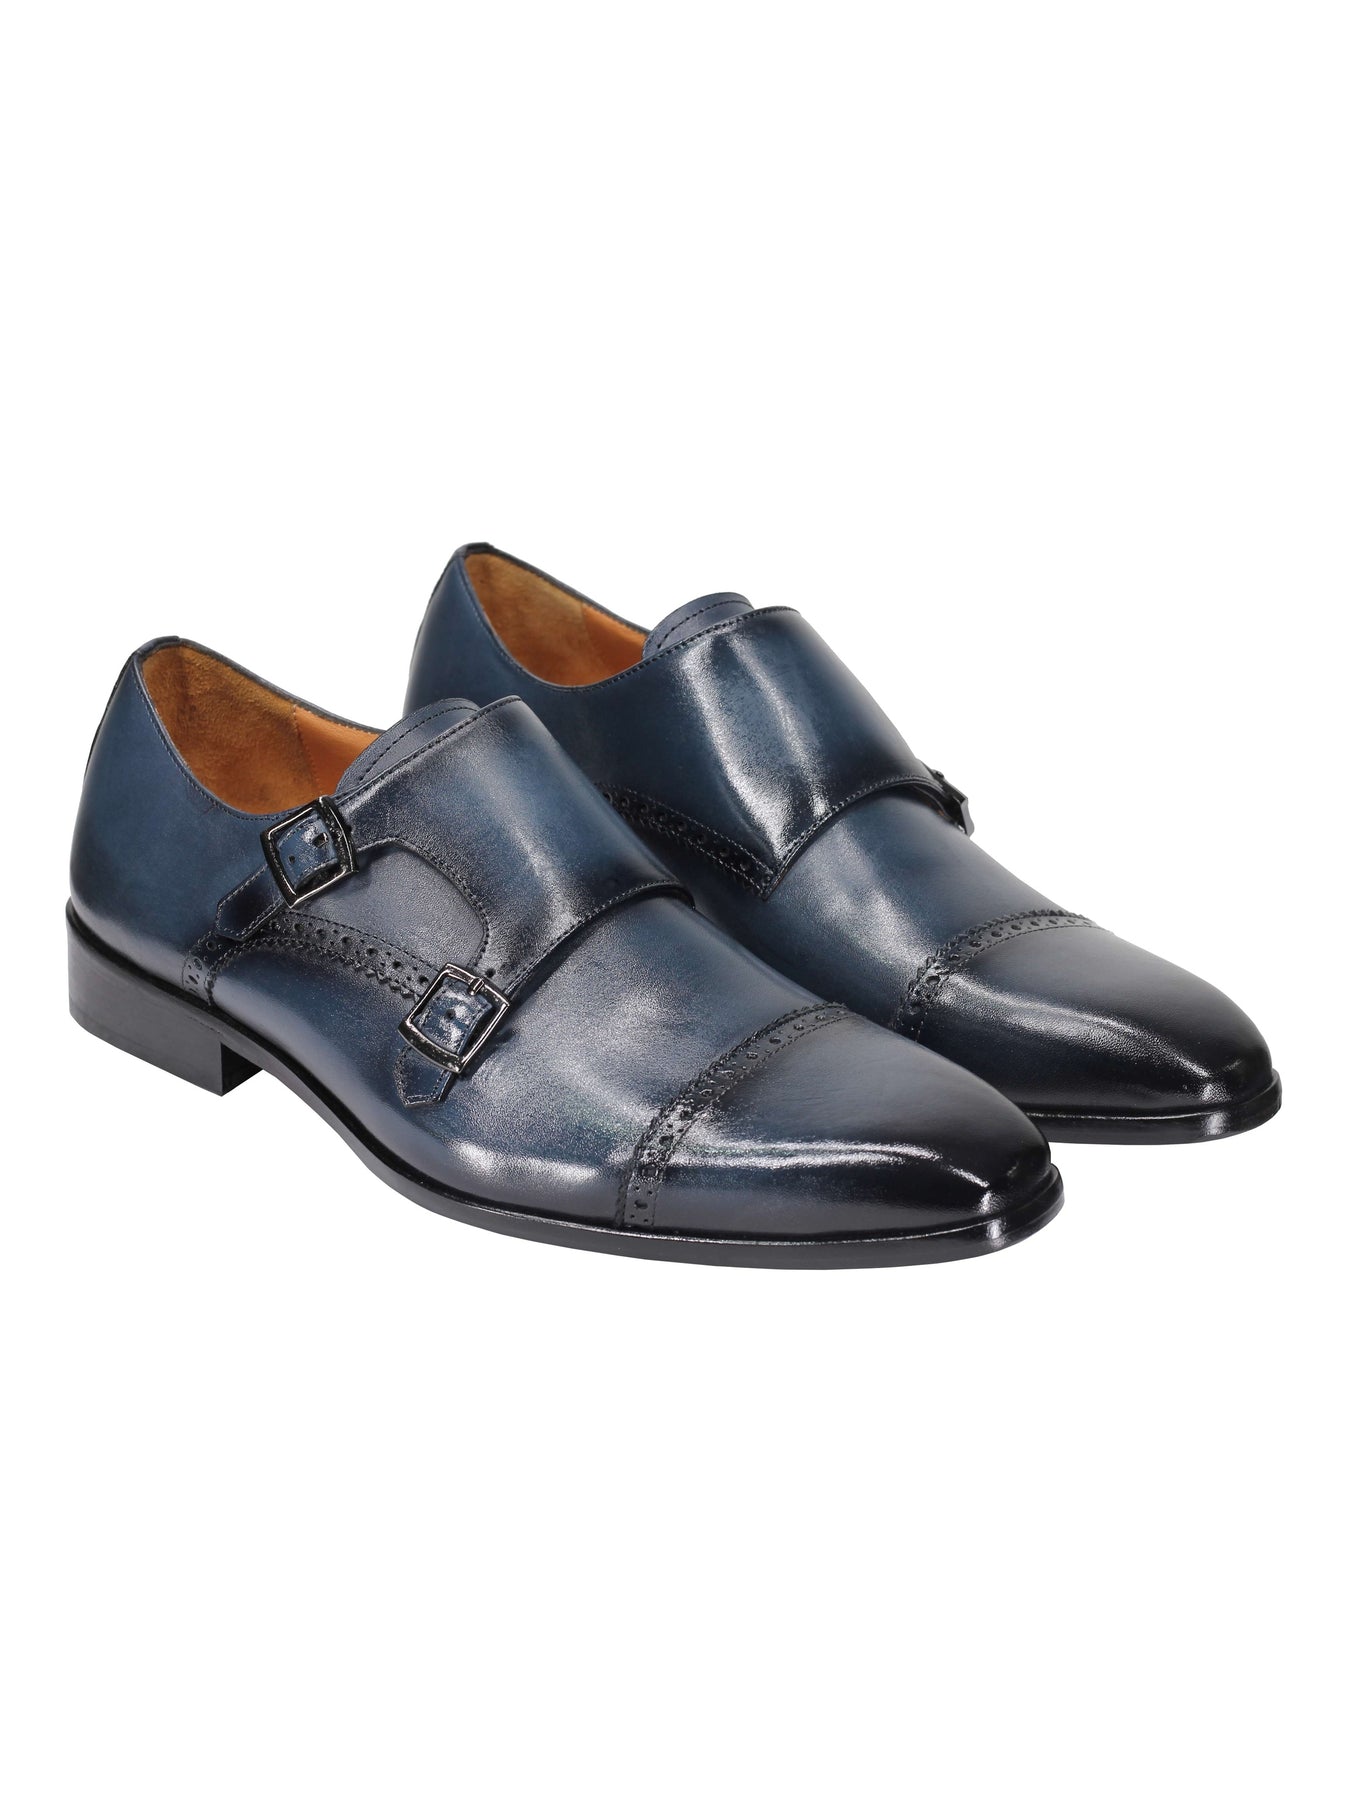 BLUE CALF LEATHER SEMI BROGUE MONK SHOES – XPOSED